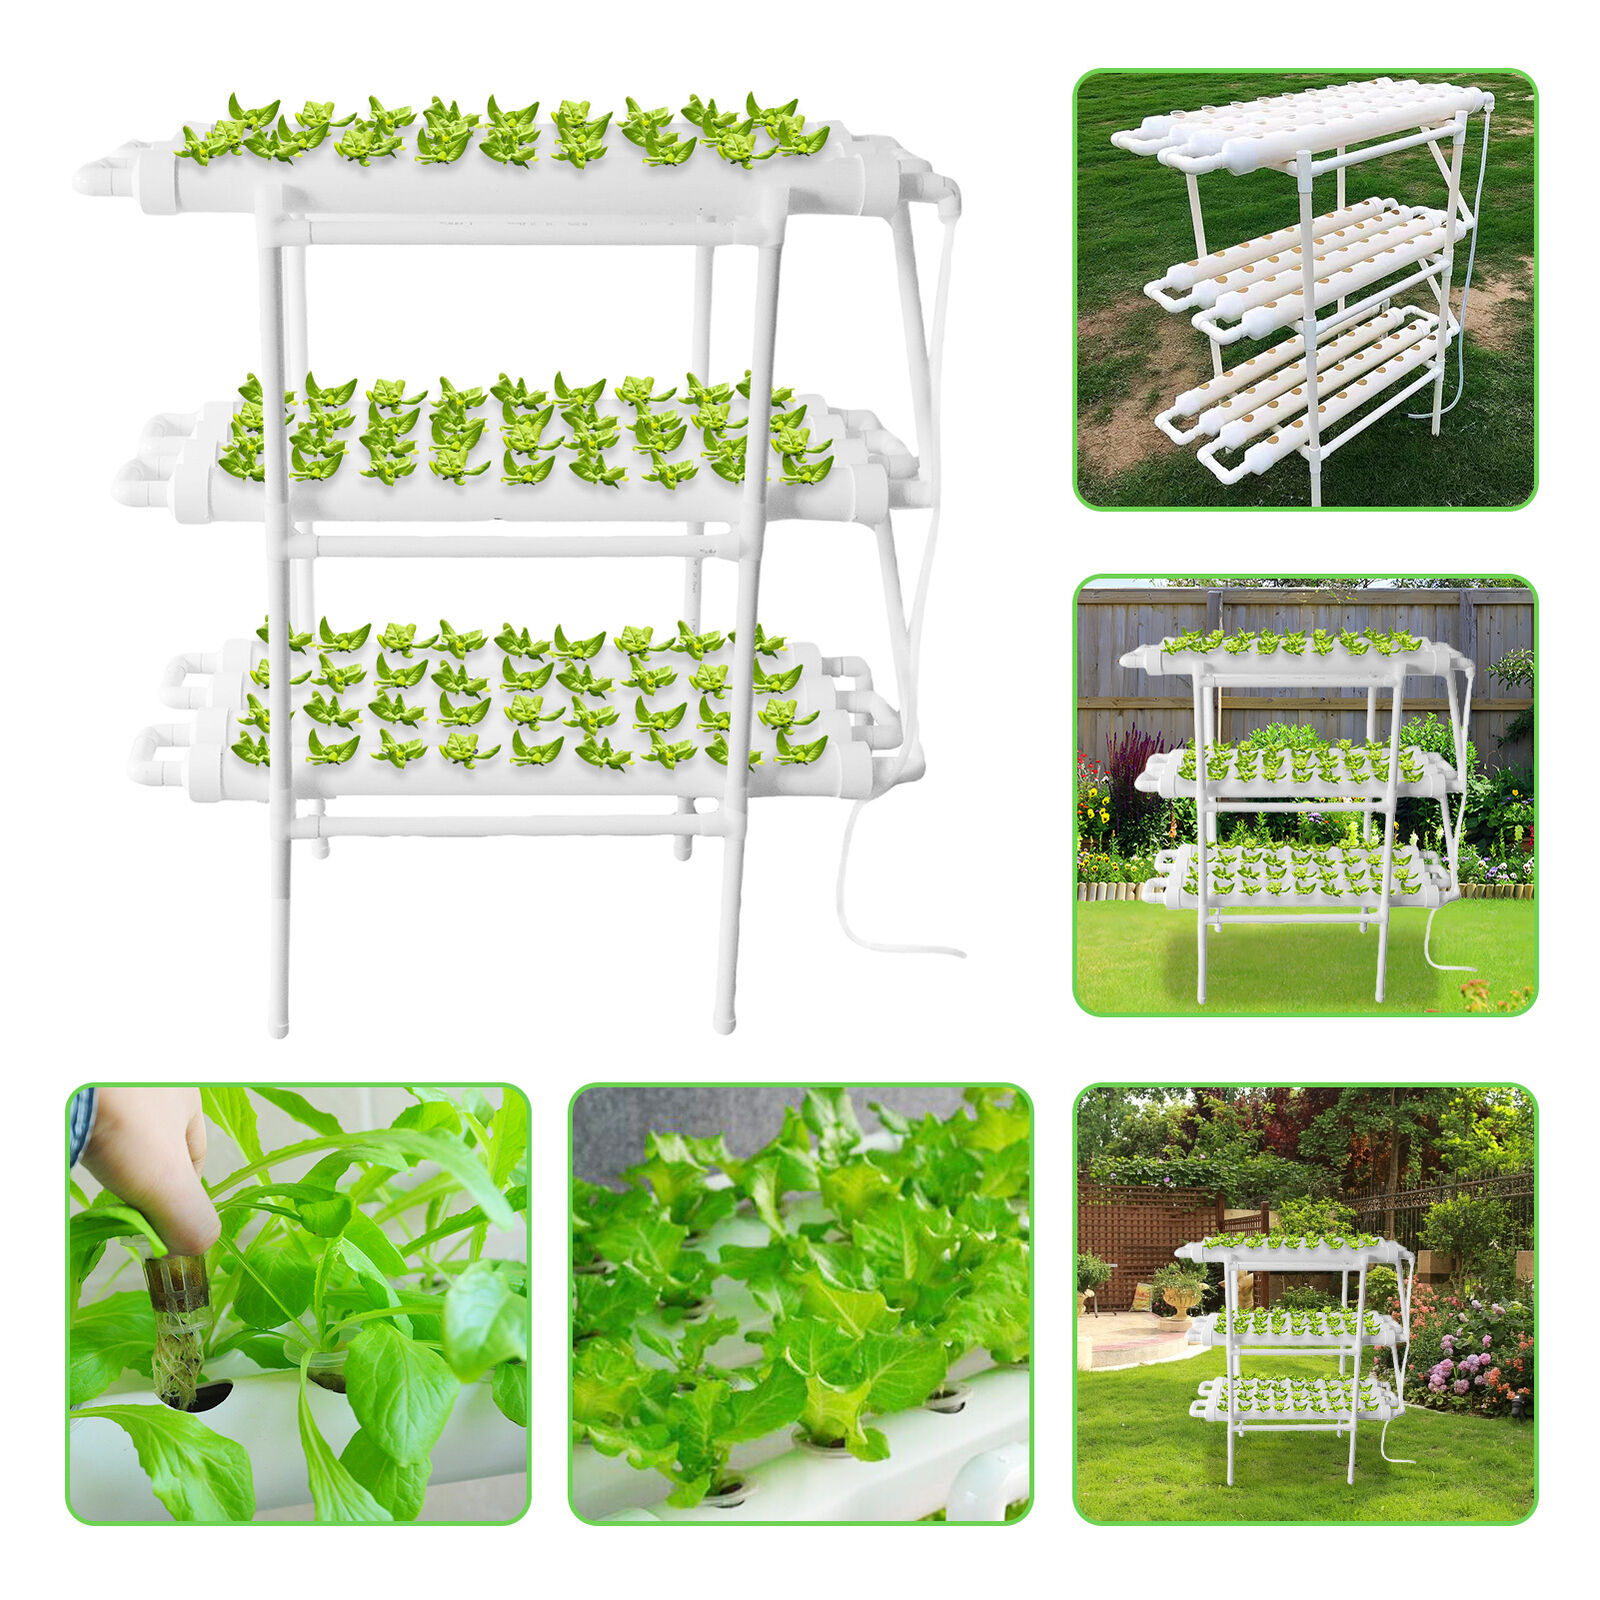 Hydroponic Grow Kit Hydroponics System 108 Plant Sites 3 Layer 12 Pipes